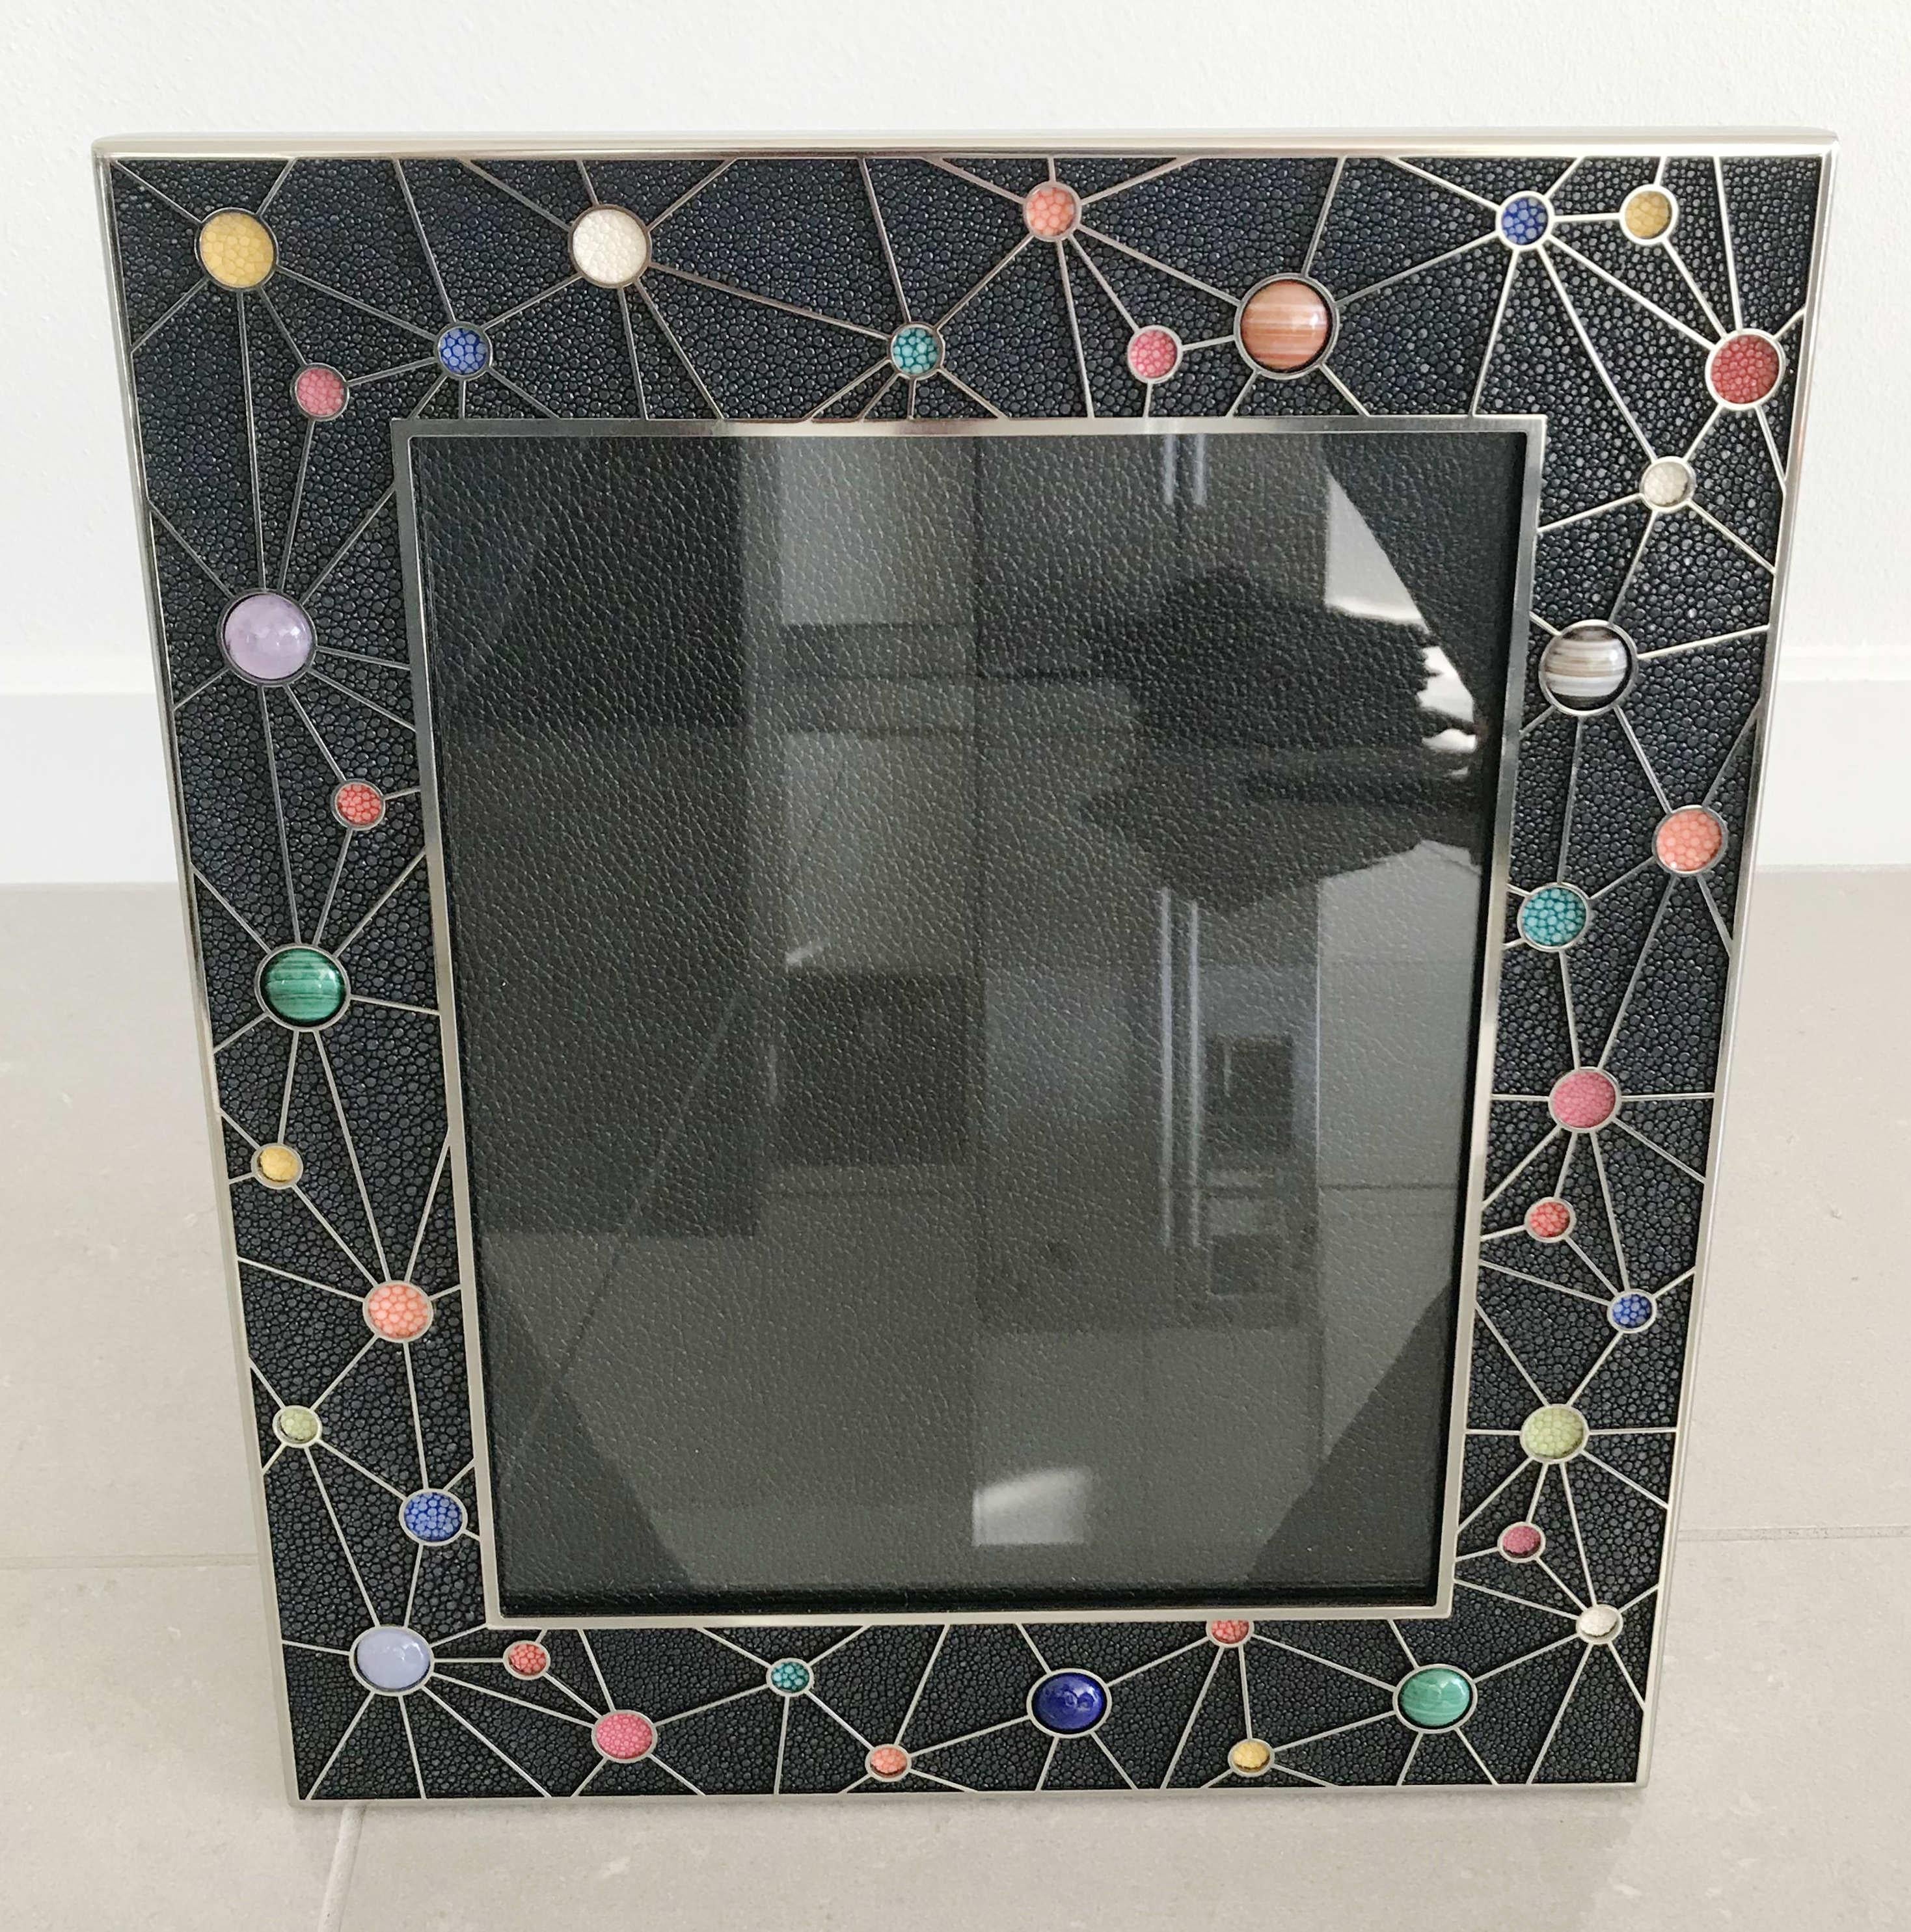 Black shagreen leather with multi-color stone inserts and nickel-plated picture frames by Fabio Ltd
Measures: Height 13.5 inches, width 11.5 inches, depth 1 inch
Photo size 8 inches by 10 inches
LAST 2 in stock in Los Angeles
Order Reference #: